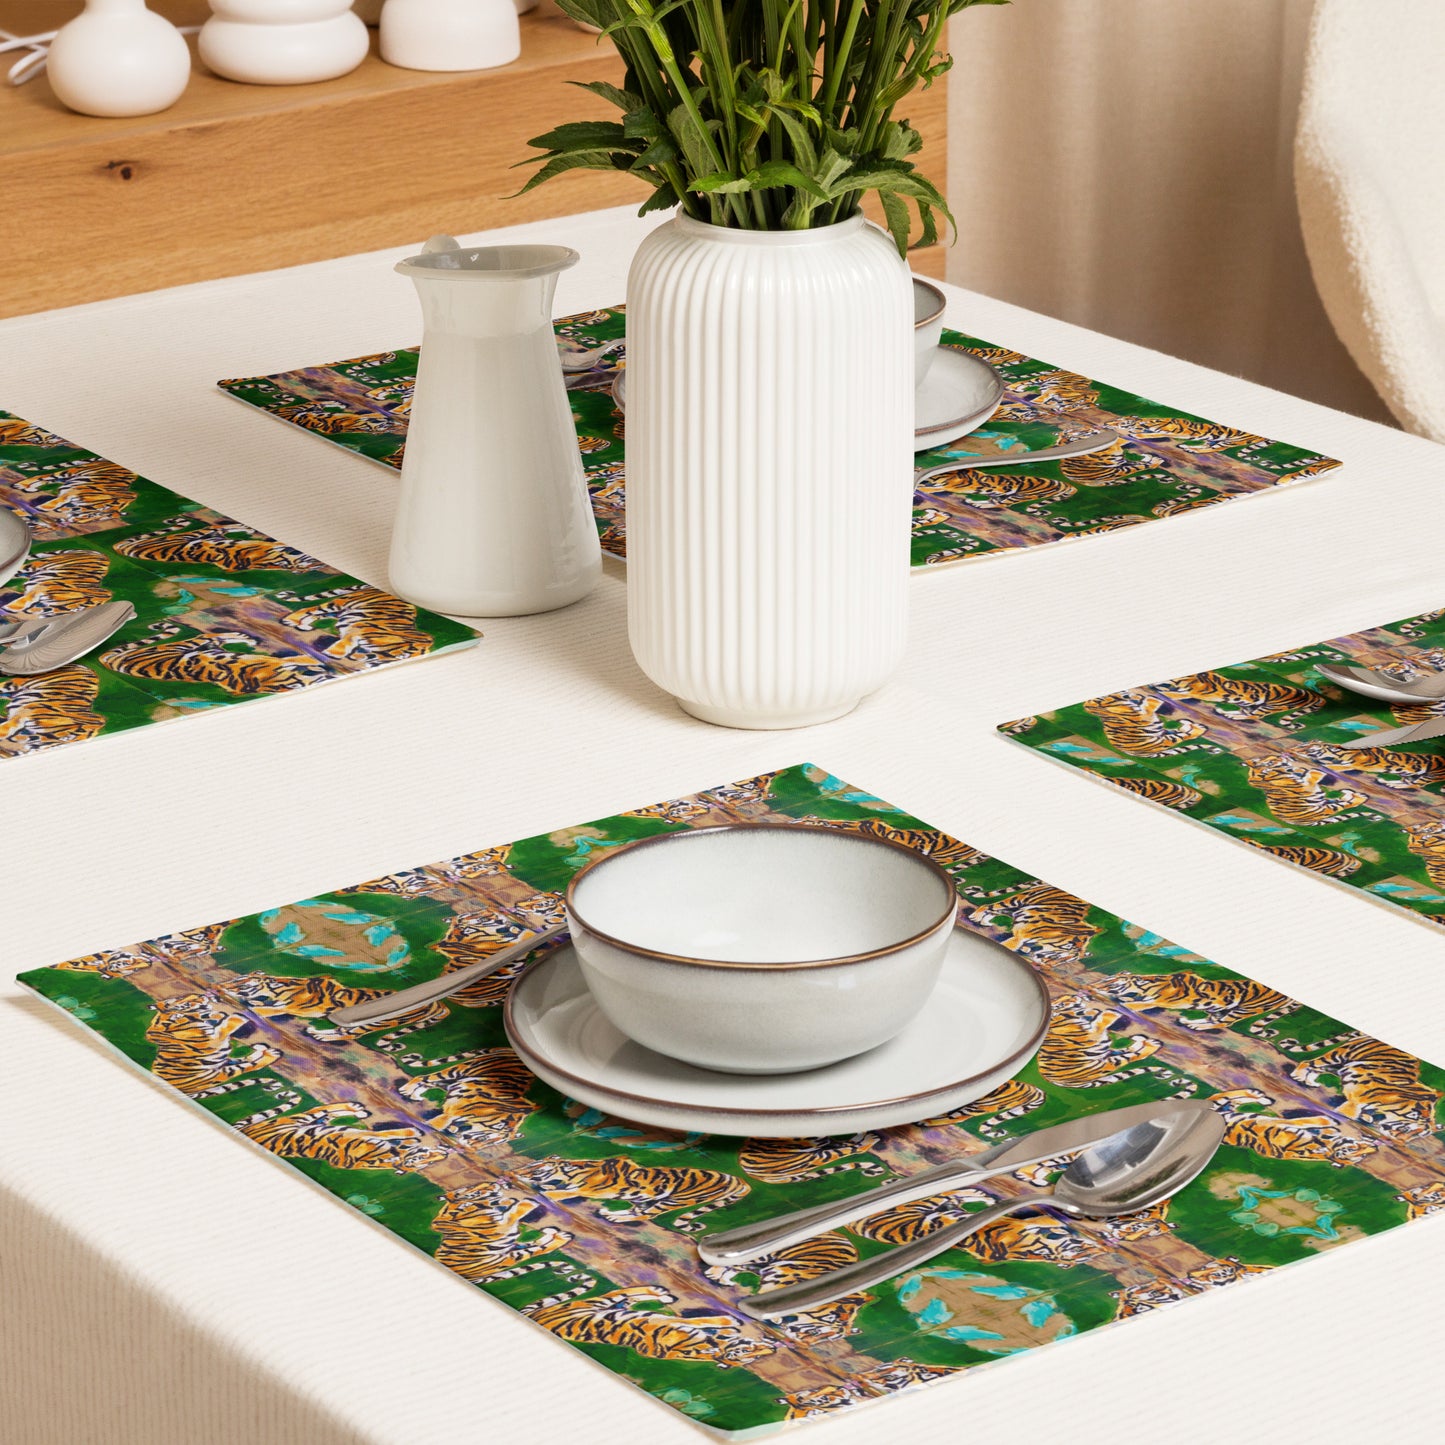 Tiger Reflections Placemat Set